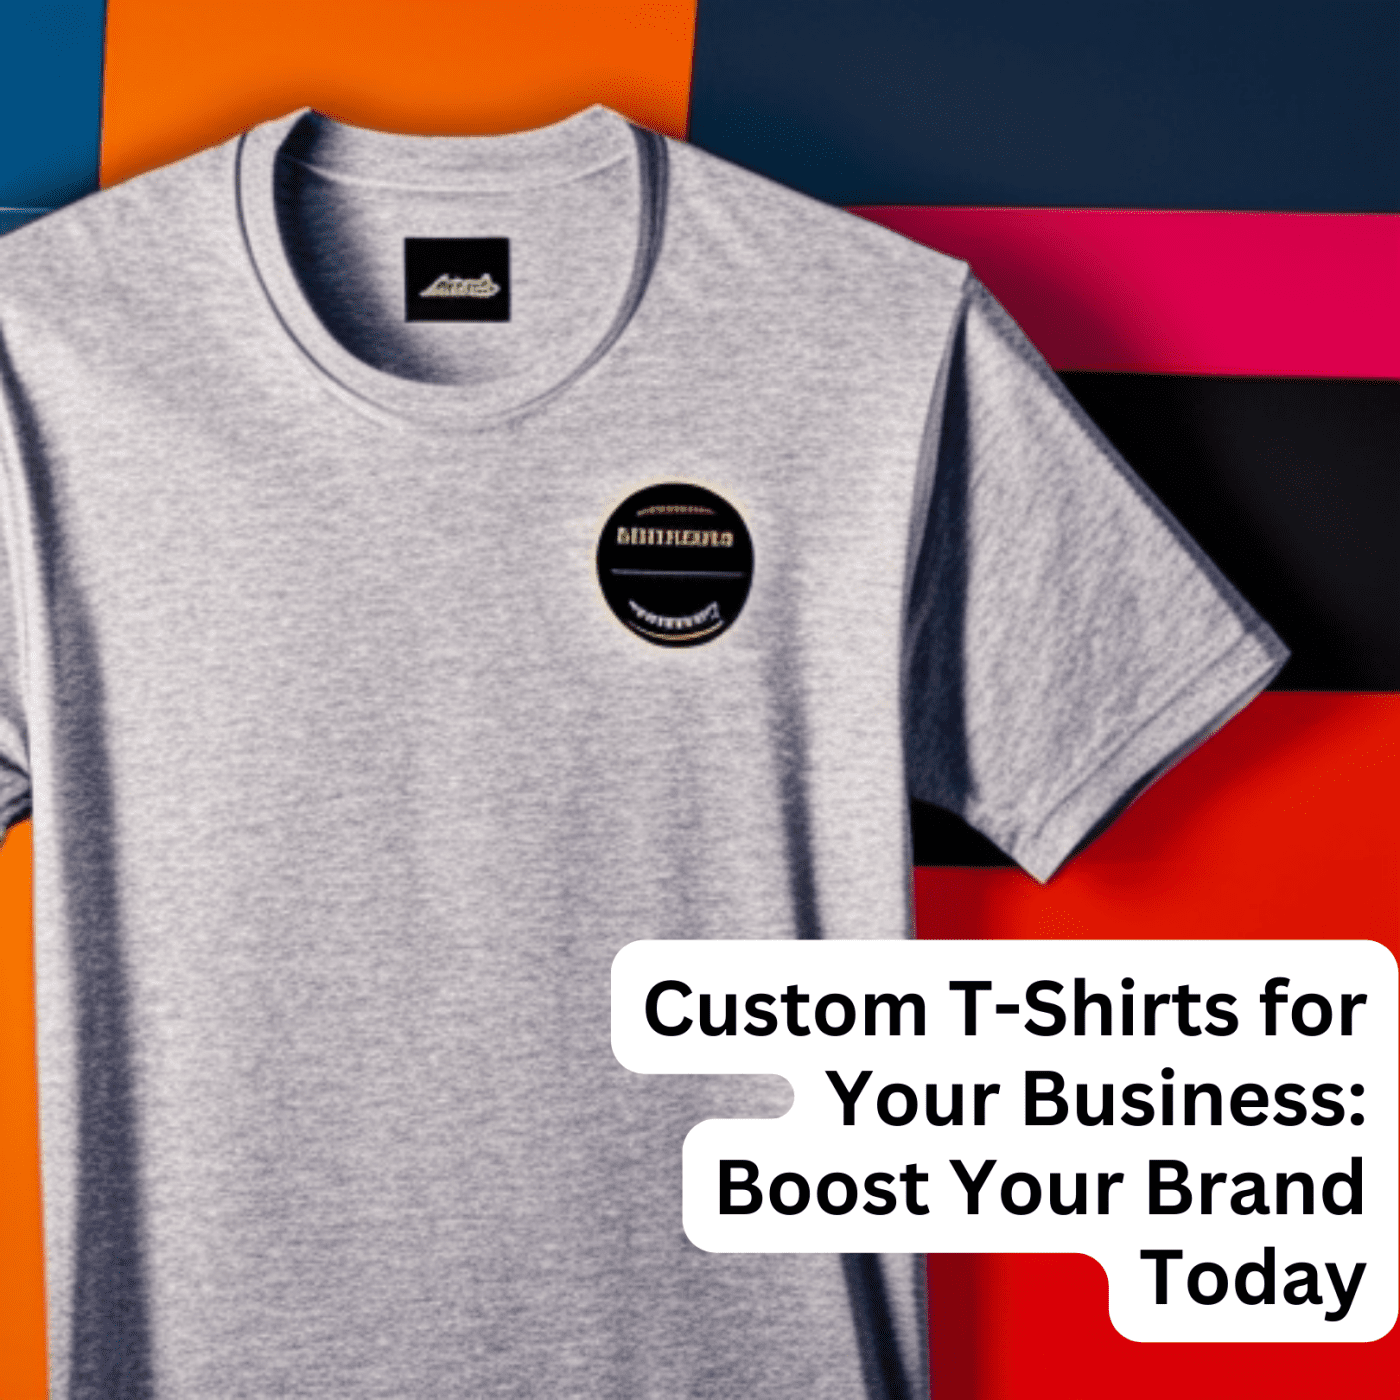 Custom T-Shirts for Your Business: Boost Your Brand Today